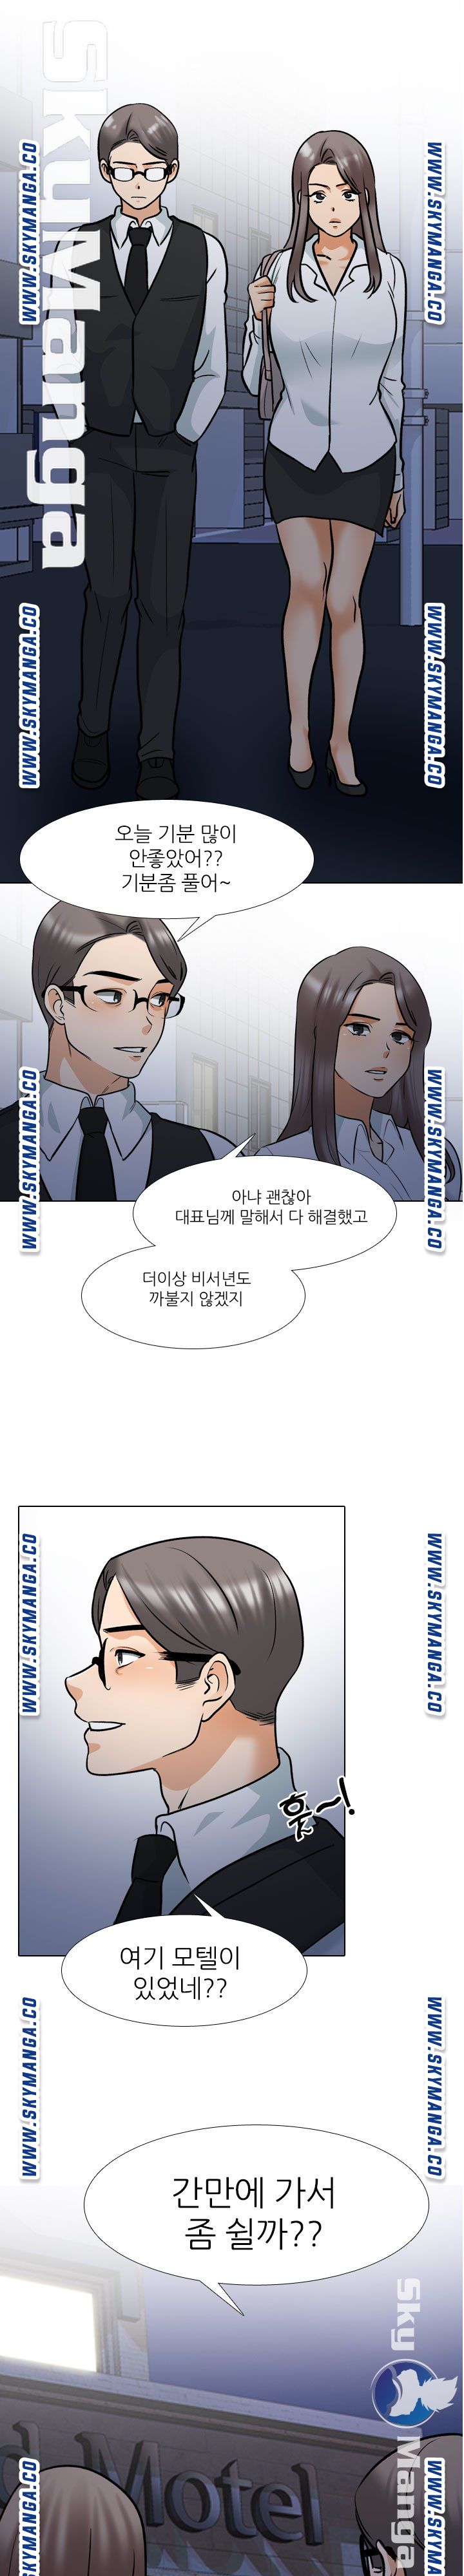 Our exchange manhwa